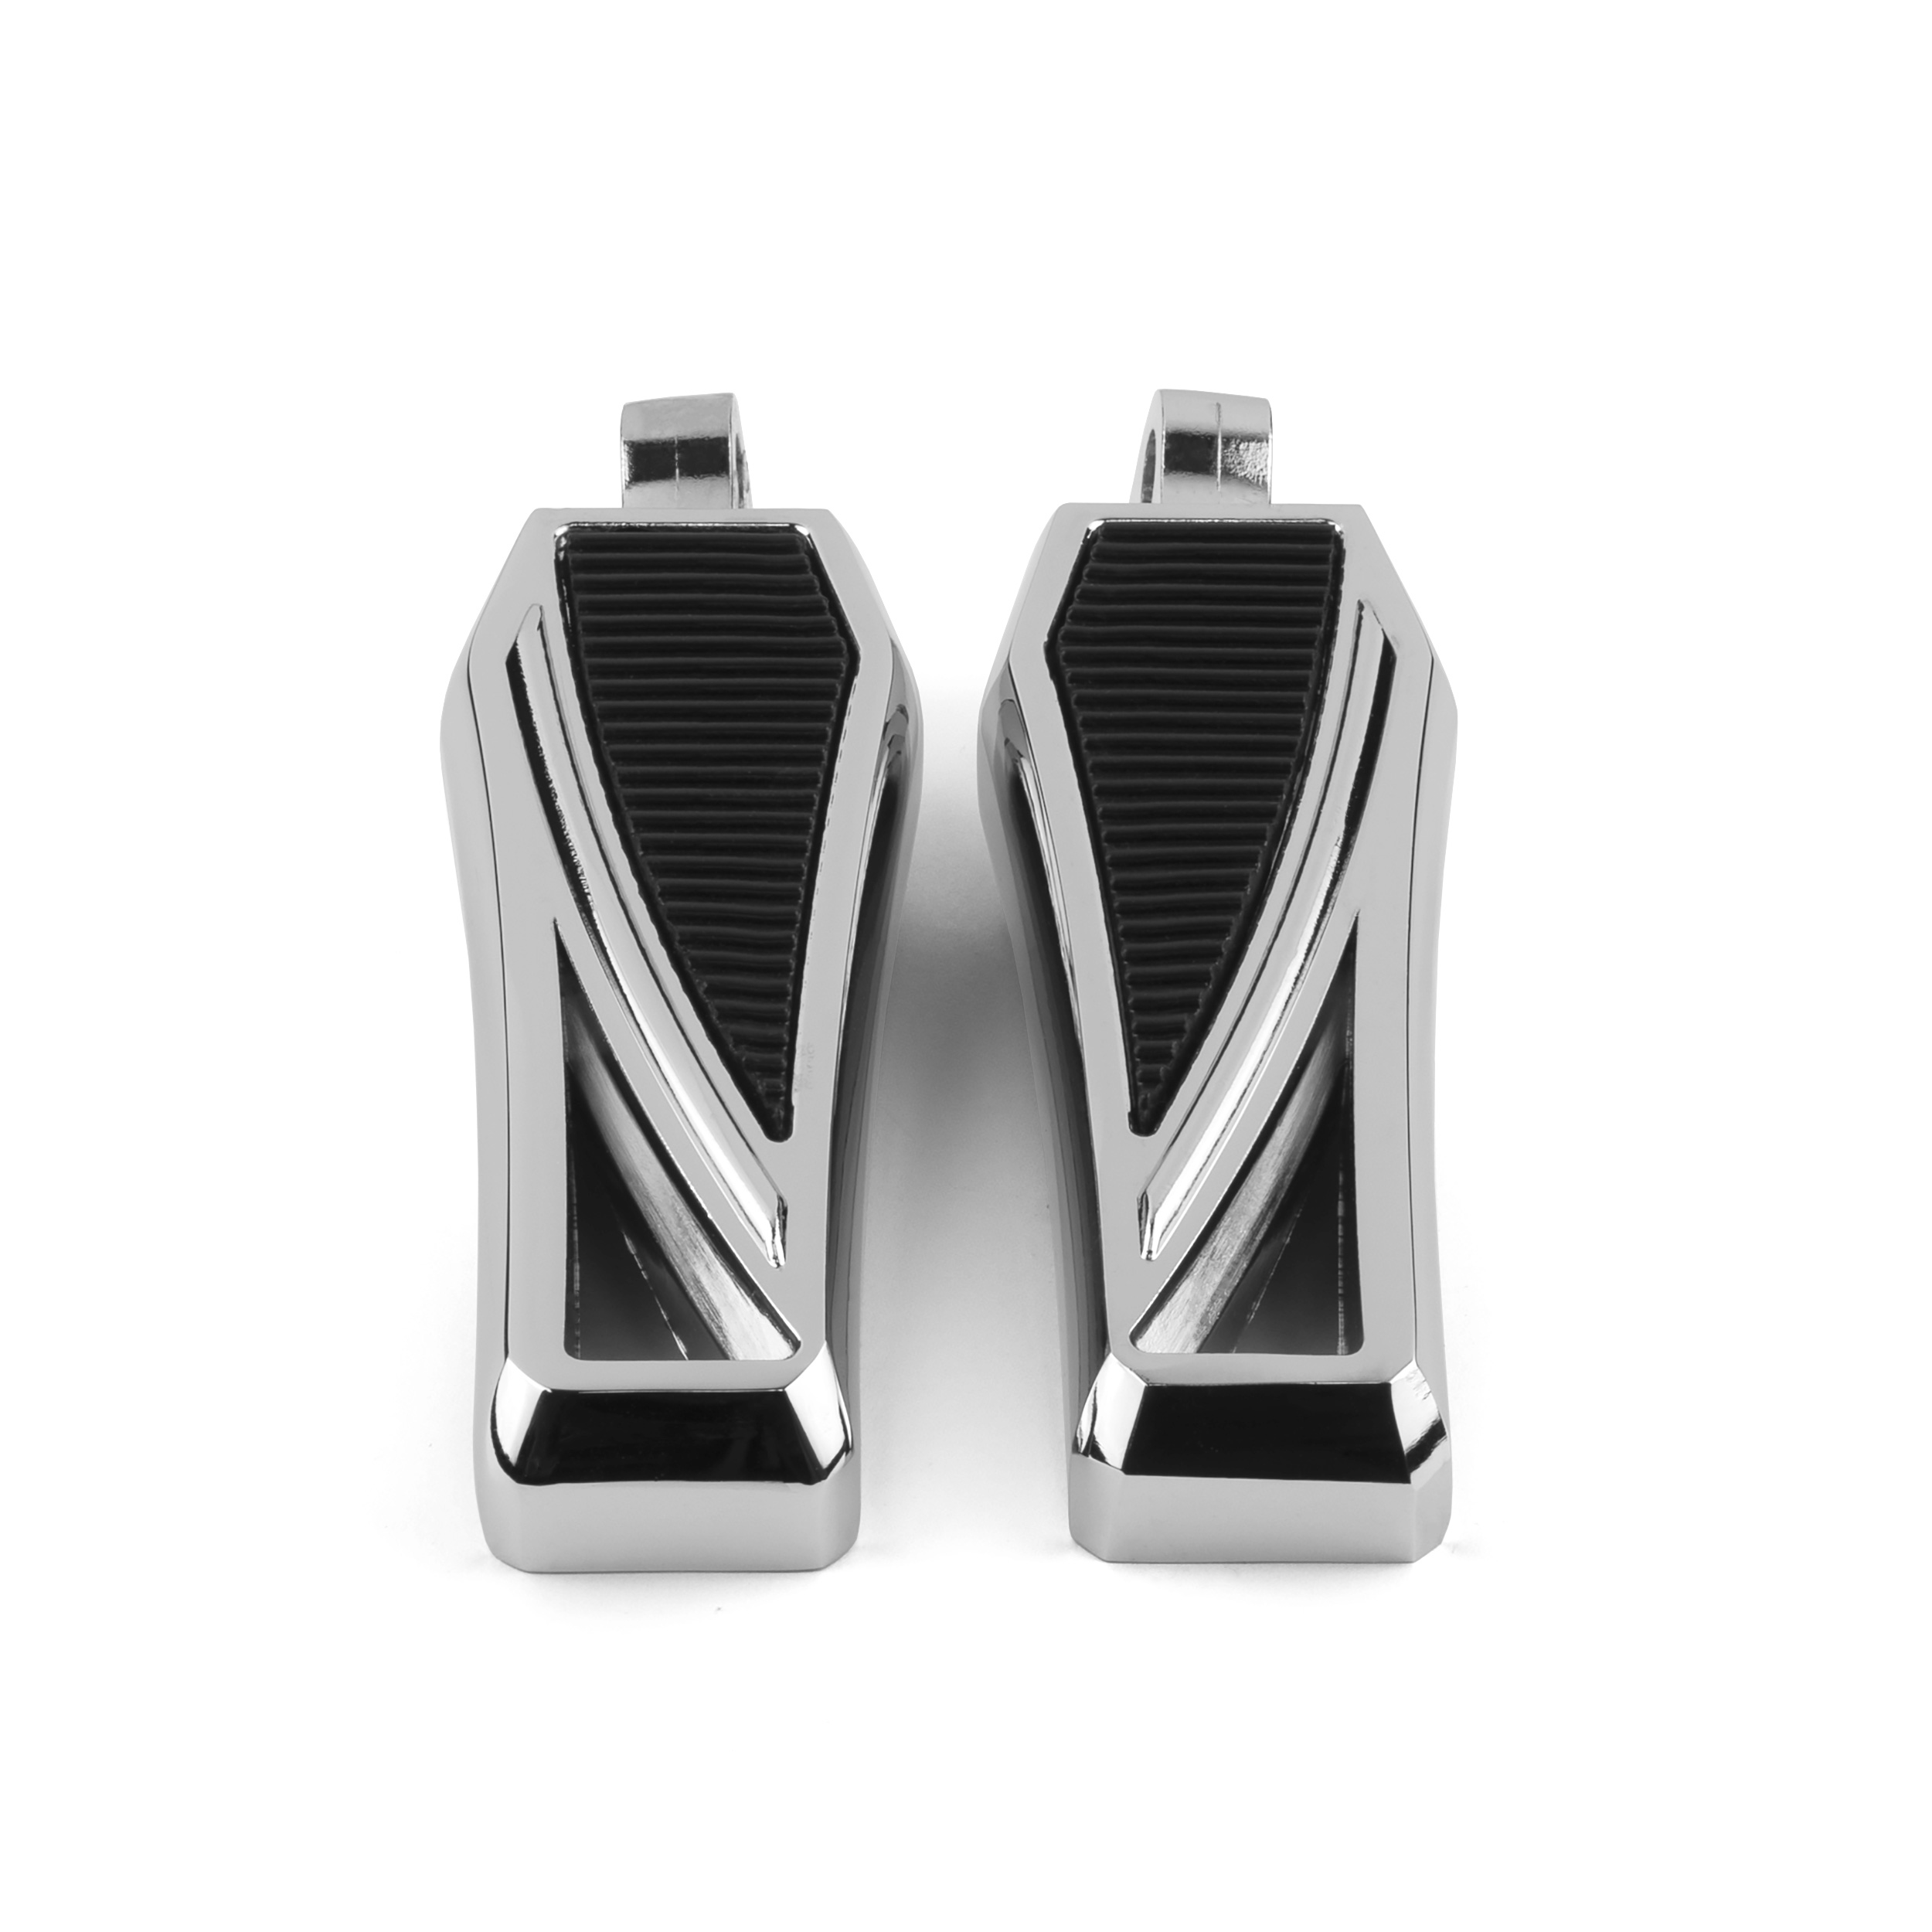 Krator Phantom Foot Pegs Footrest, 1 Pair, Chrome, Compatible with 1989-2022 Harley Davidson Electra Glide Ultra Classic FLHTCU